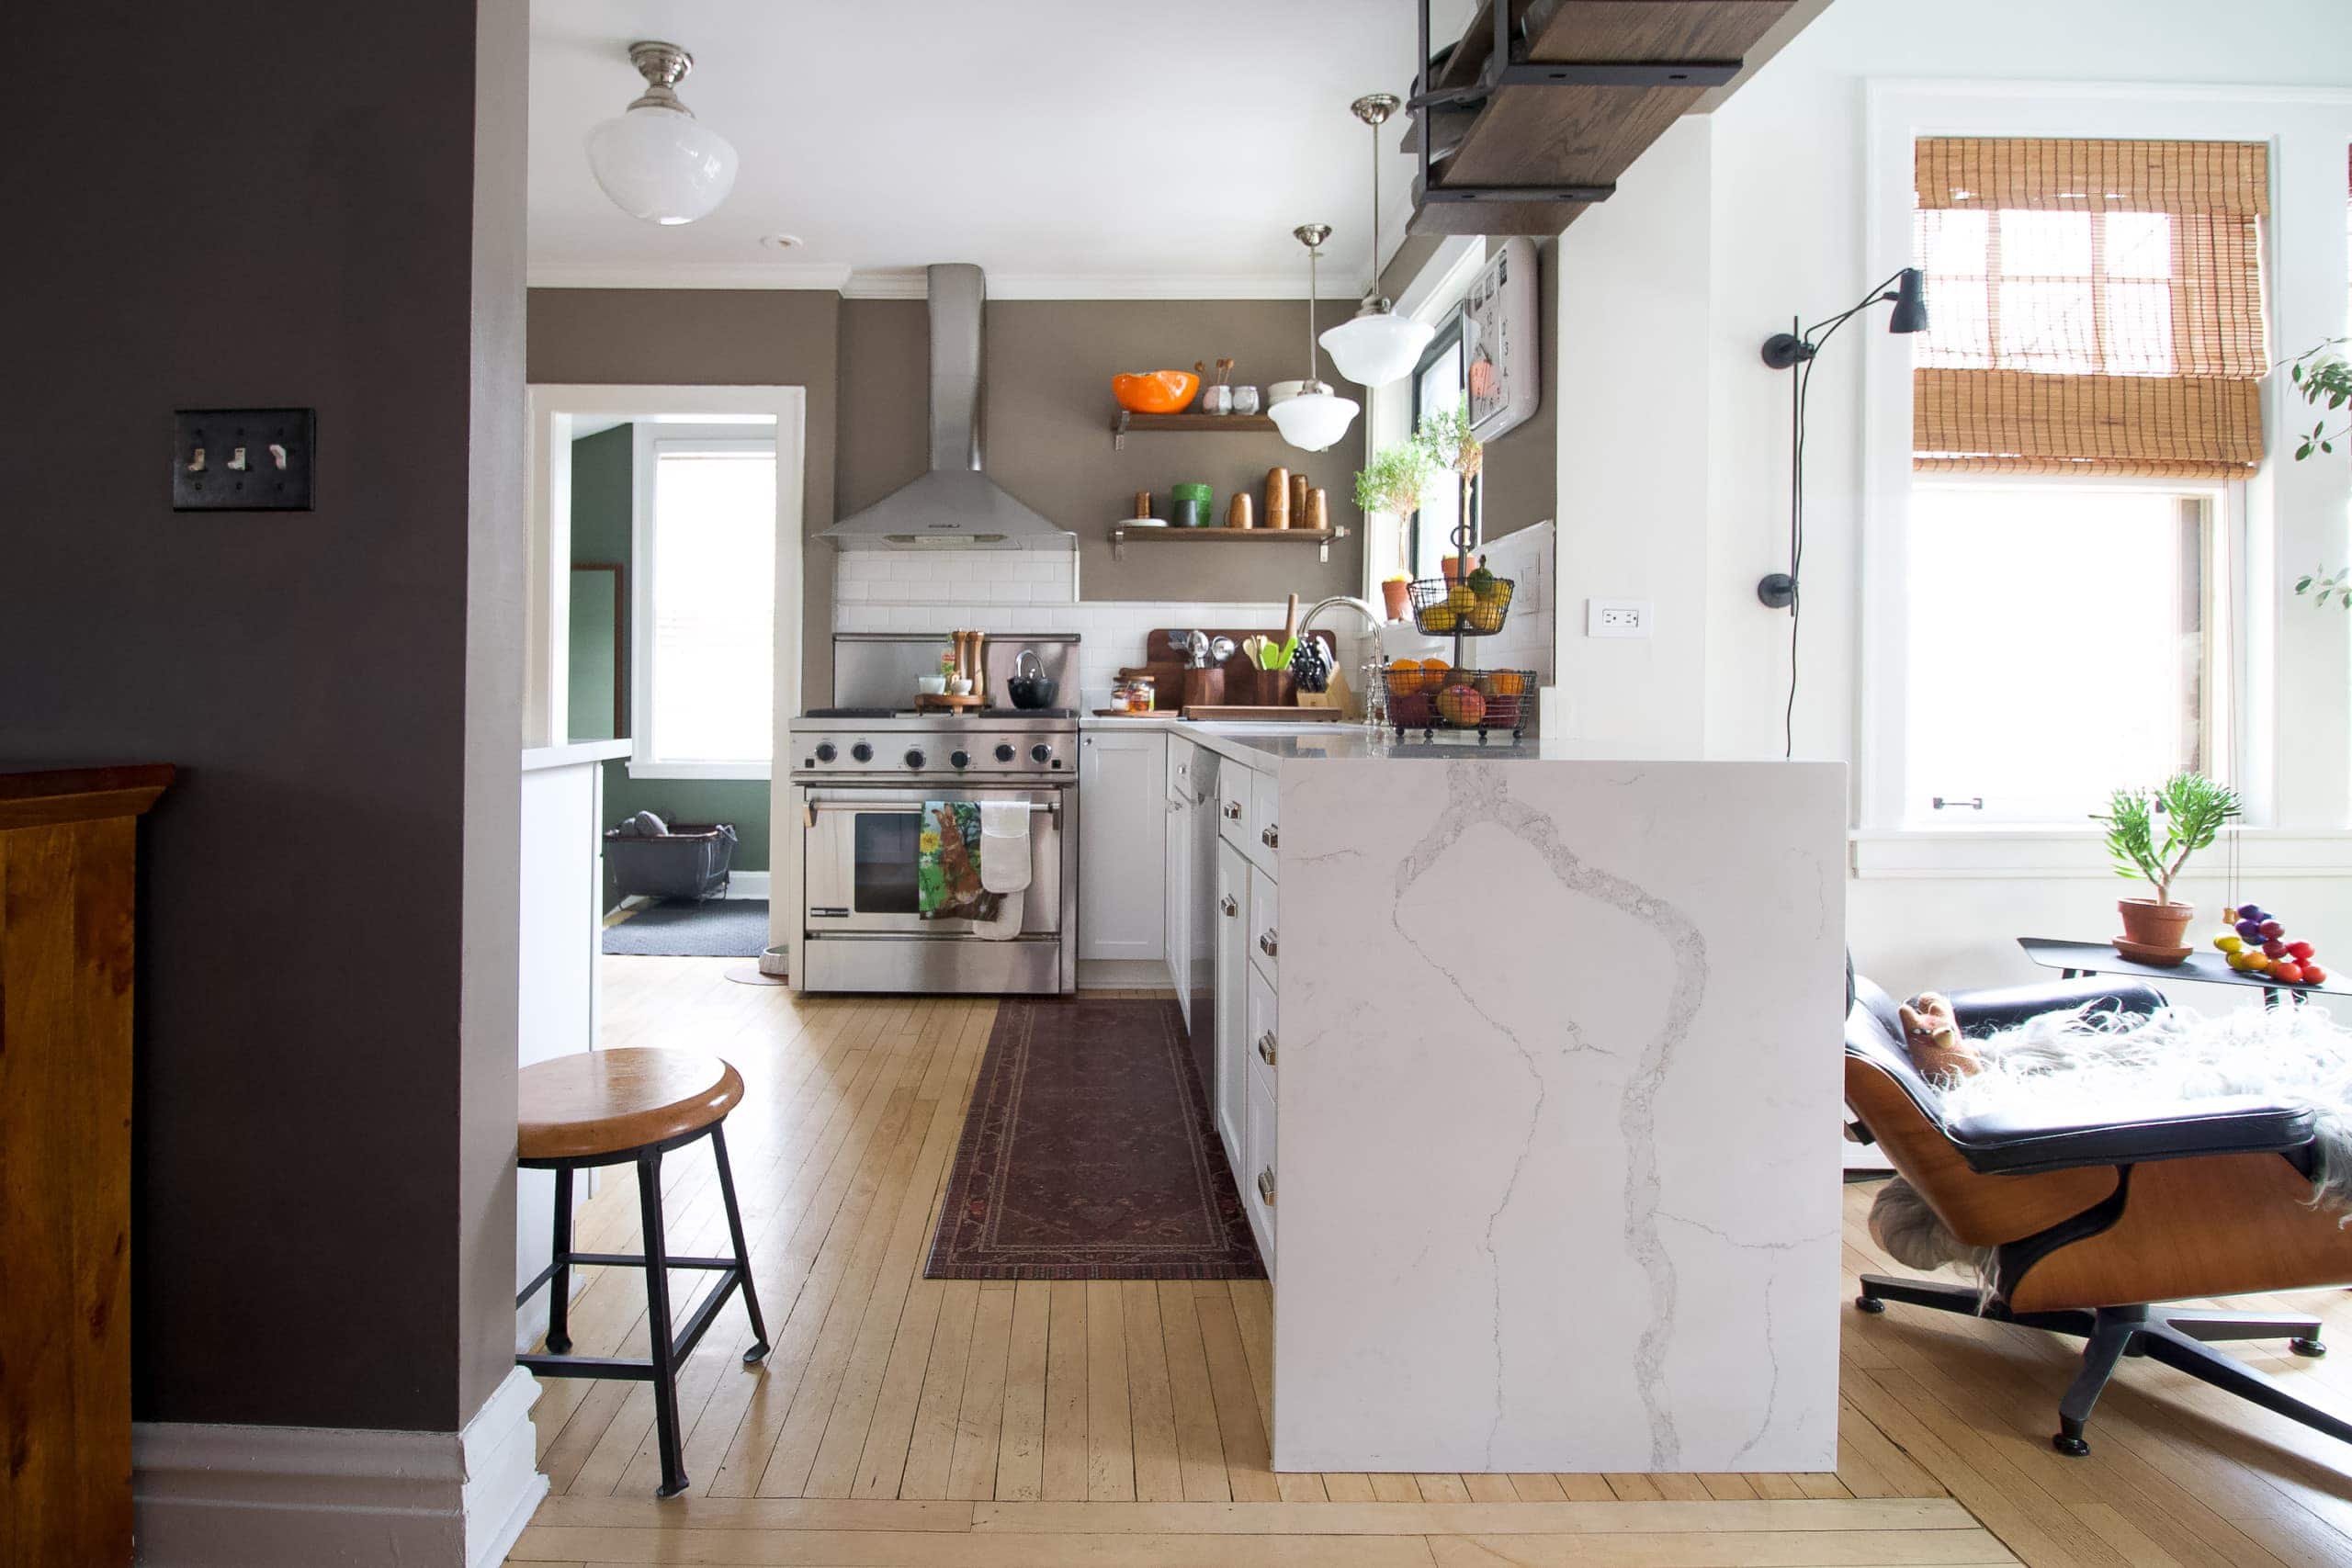 Small and functional kitchen in Evanston, Illinois